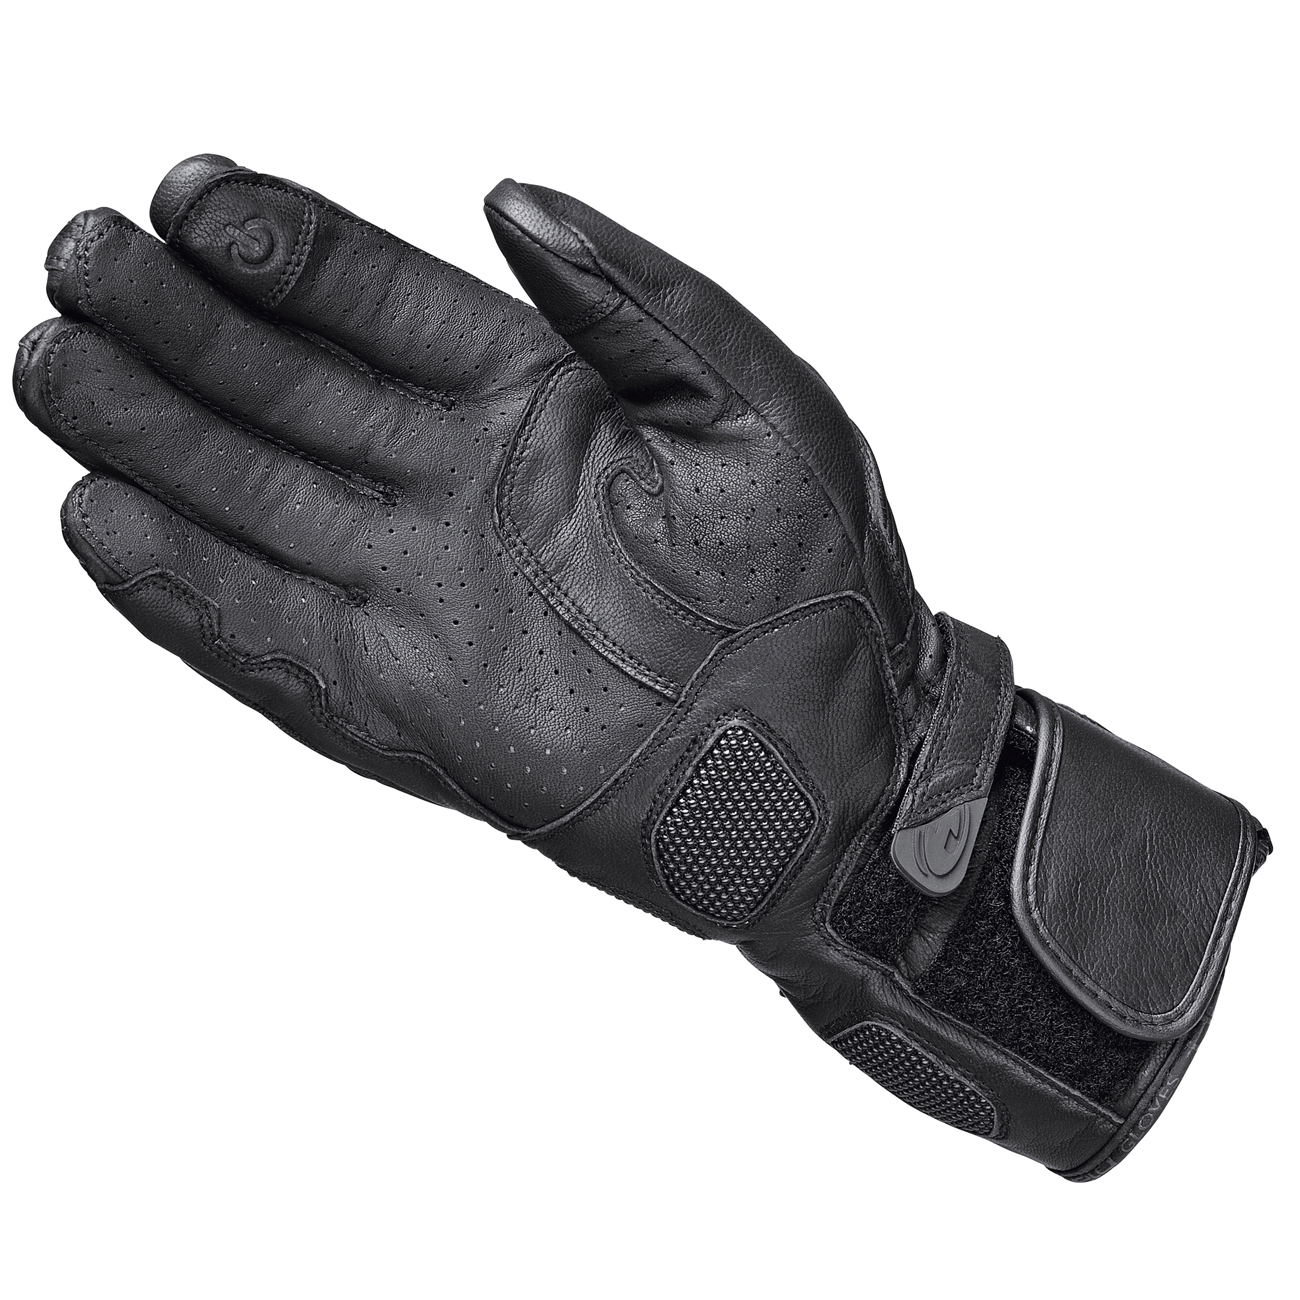 Touch Touring glove